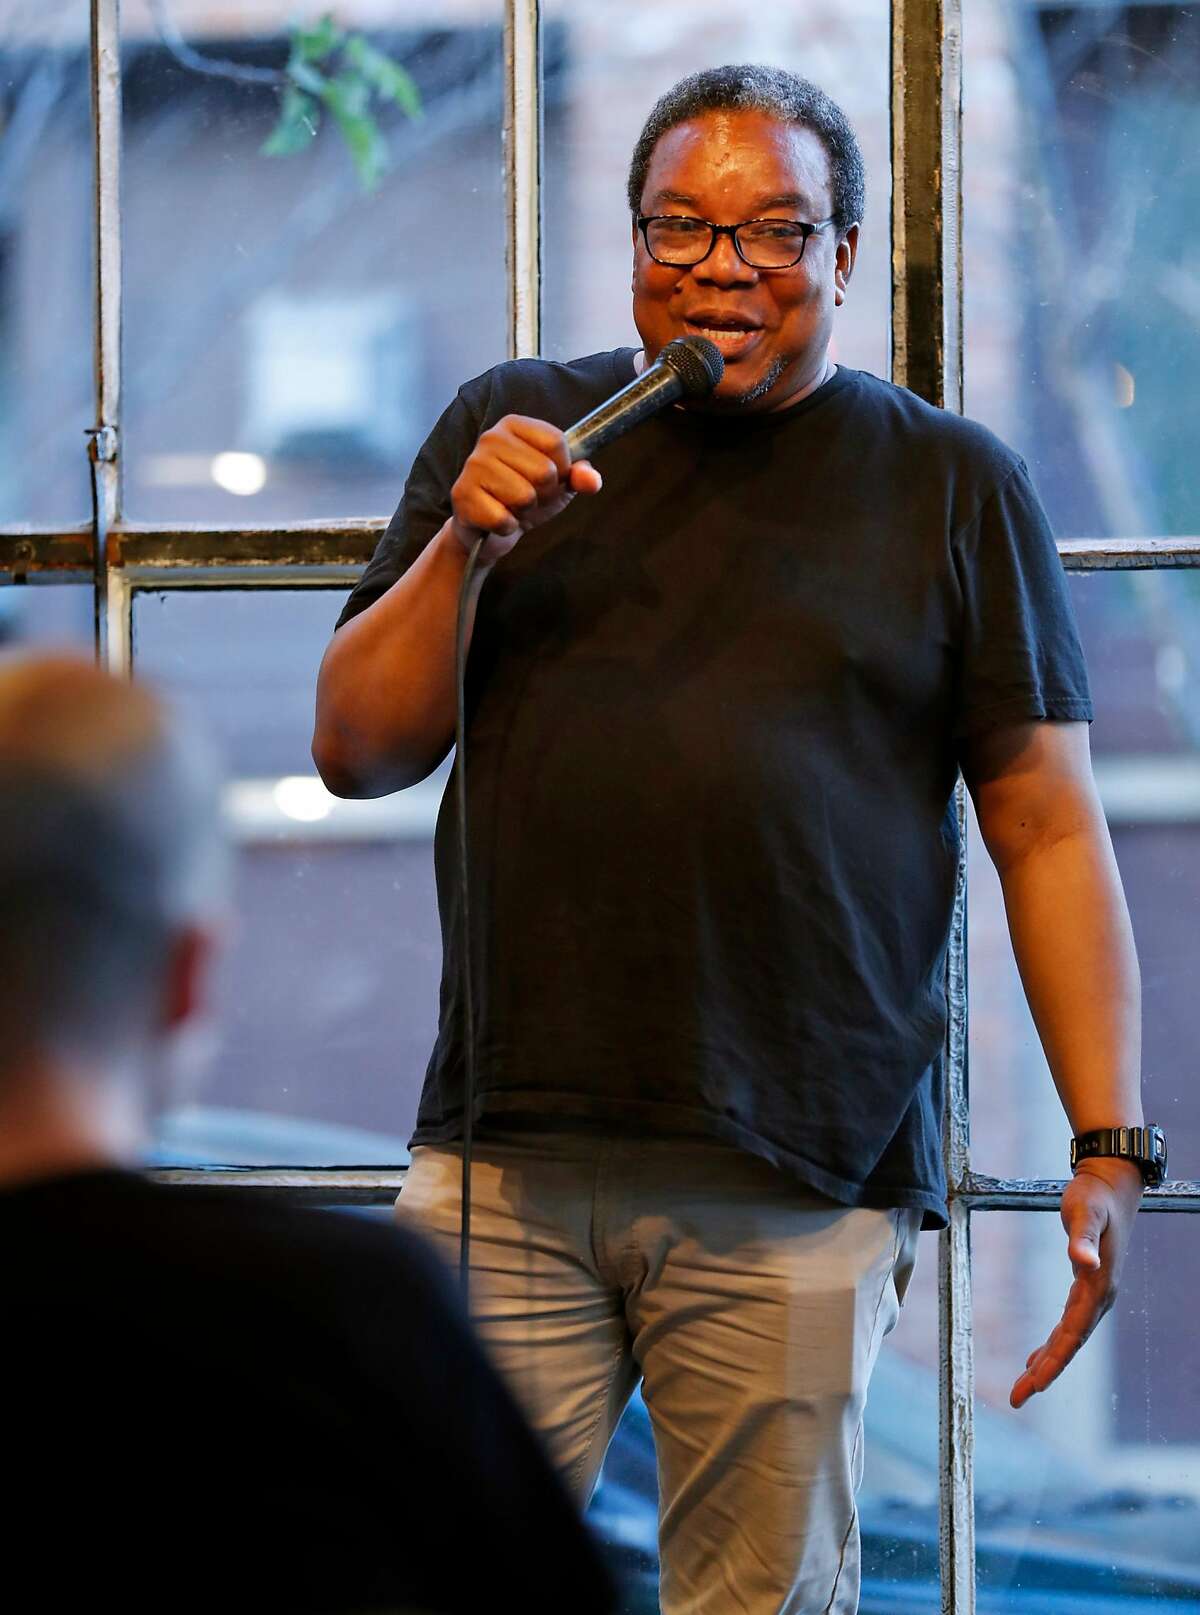 Tony Sparks introduces a comedian during Magic Monday Open Mic at Brainwash Cafe in San Francisco, Calif., on Monday, September 4, 2017.